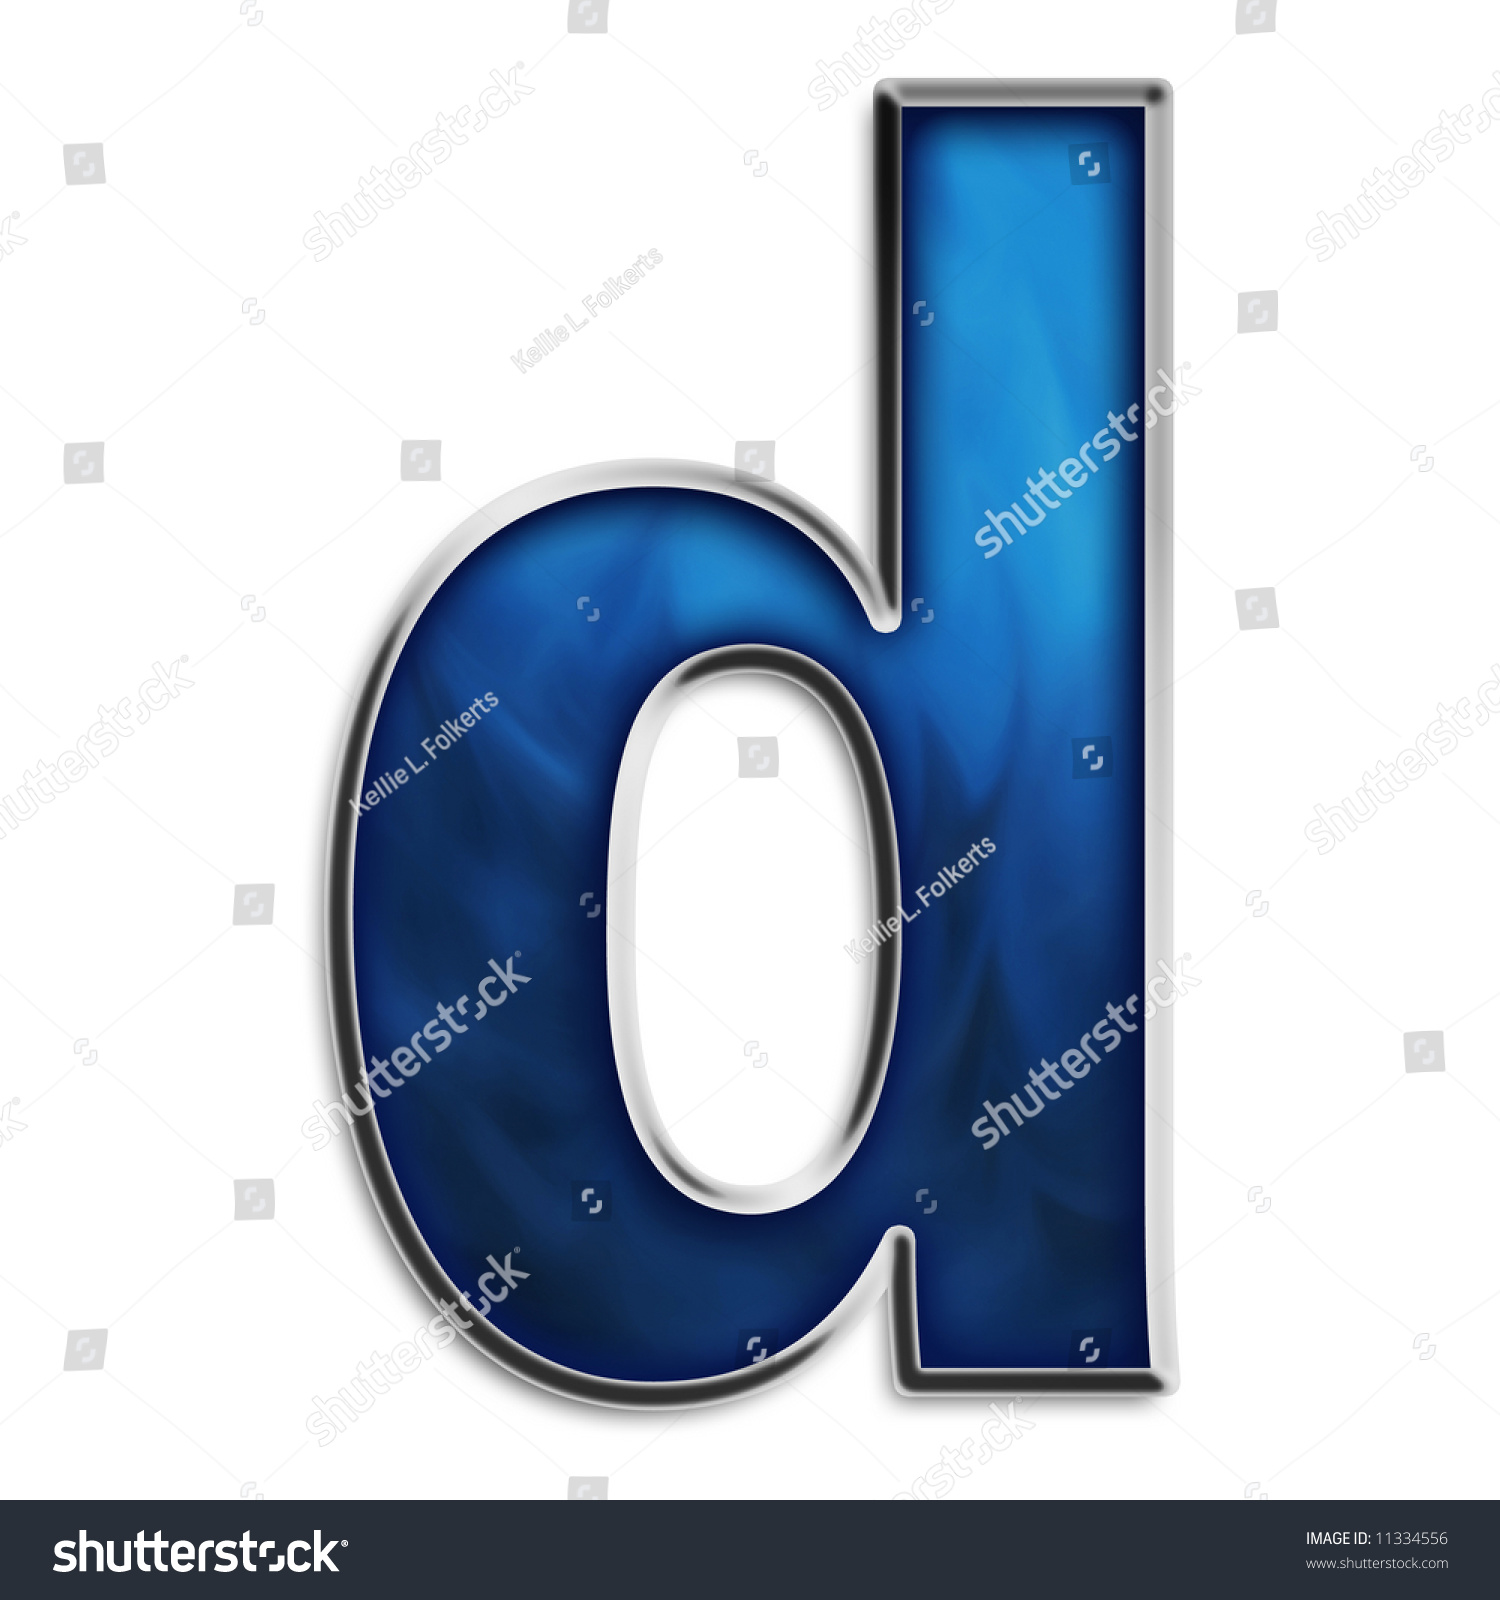 Lowercase D Steel Smokey Blue Isolated On White Stock Photo 11334556 ...